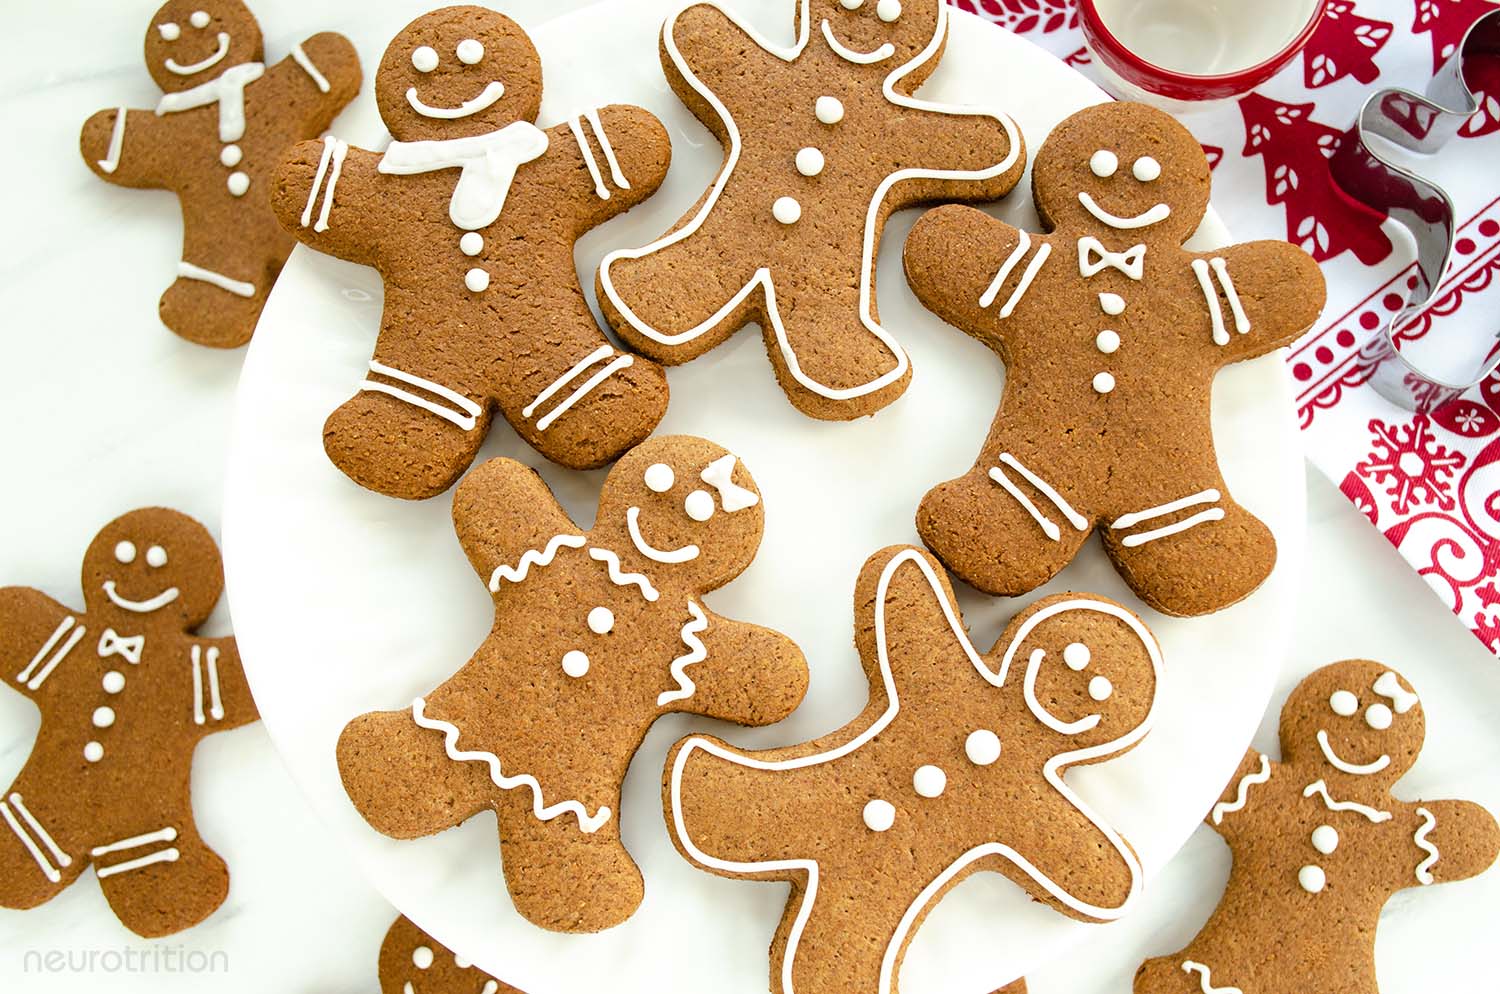 Gingerbread people-shaped cookies, with white icing decorations.